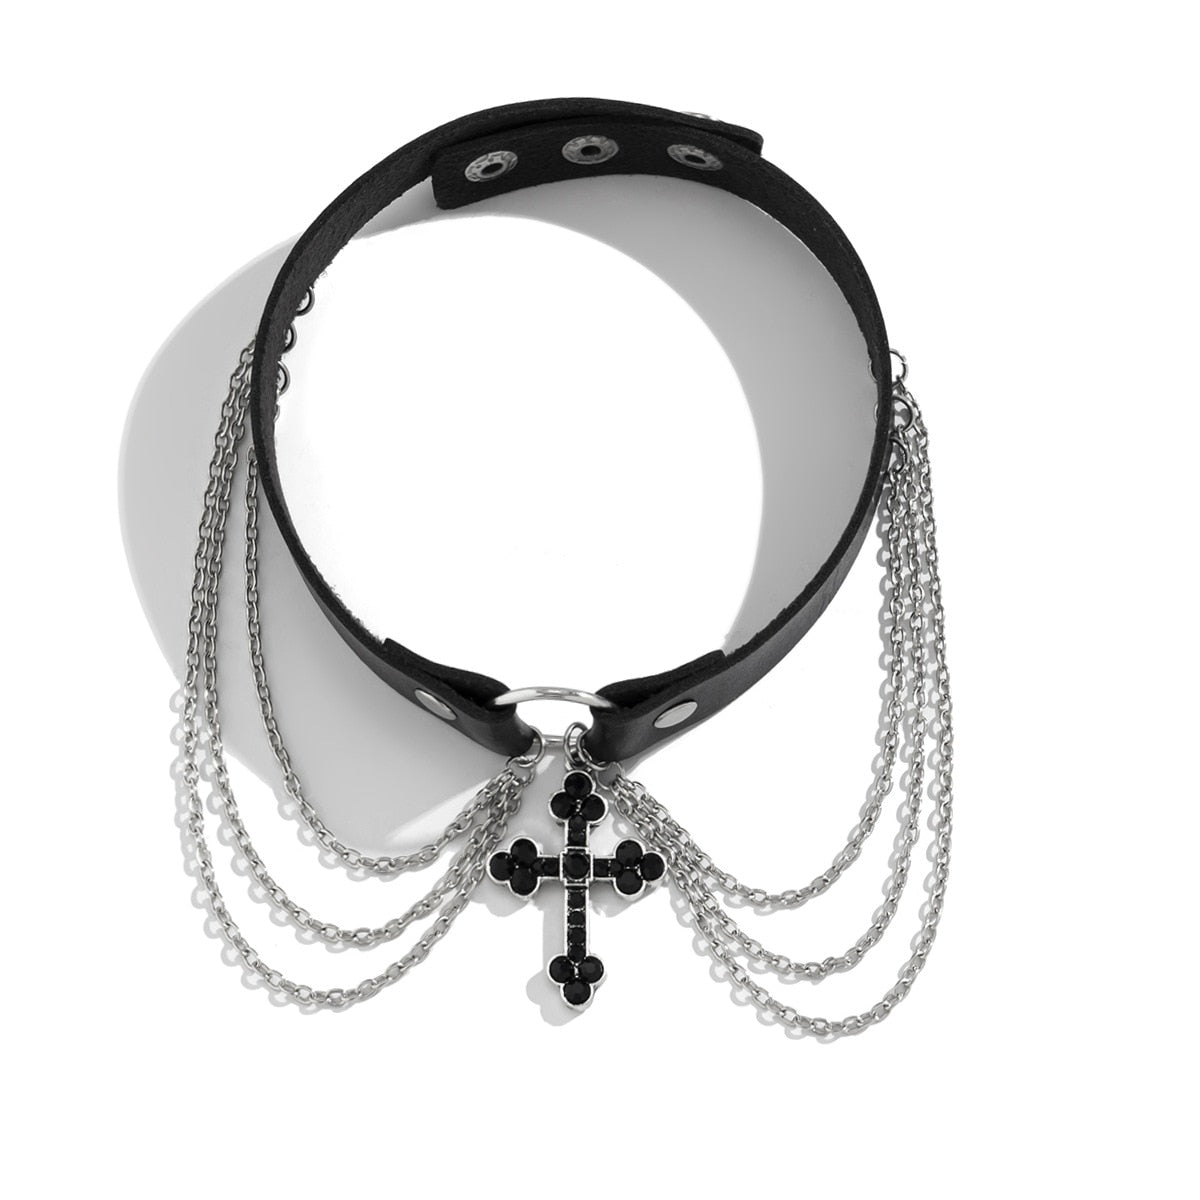 Gothic Black Cross Chain Choker Necklace